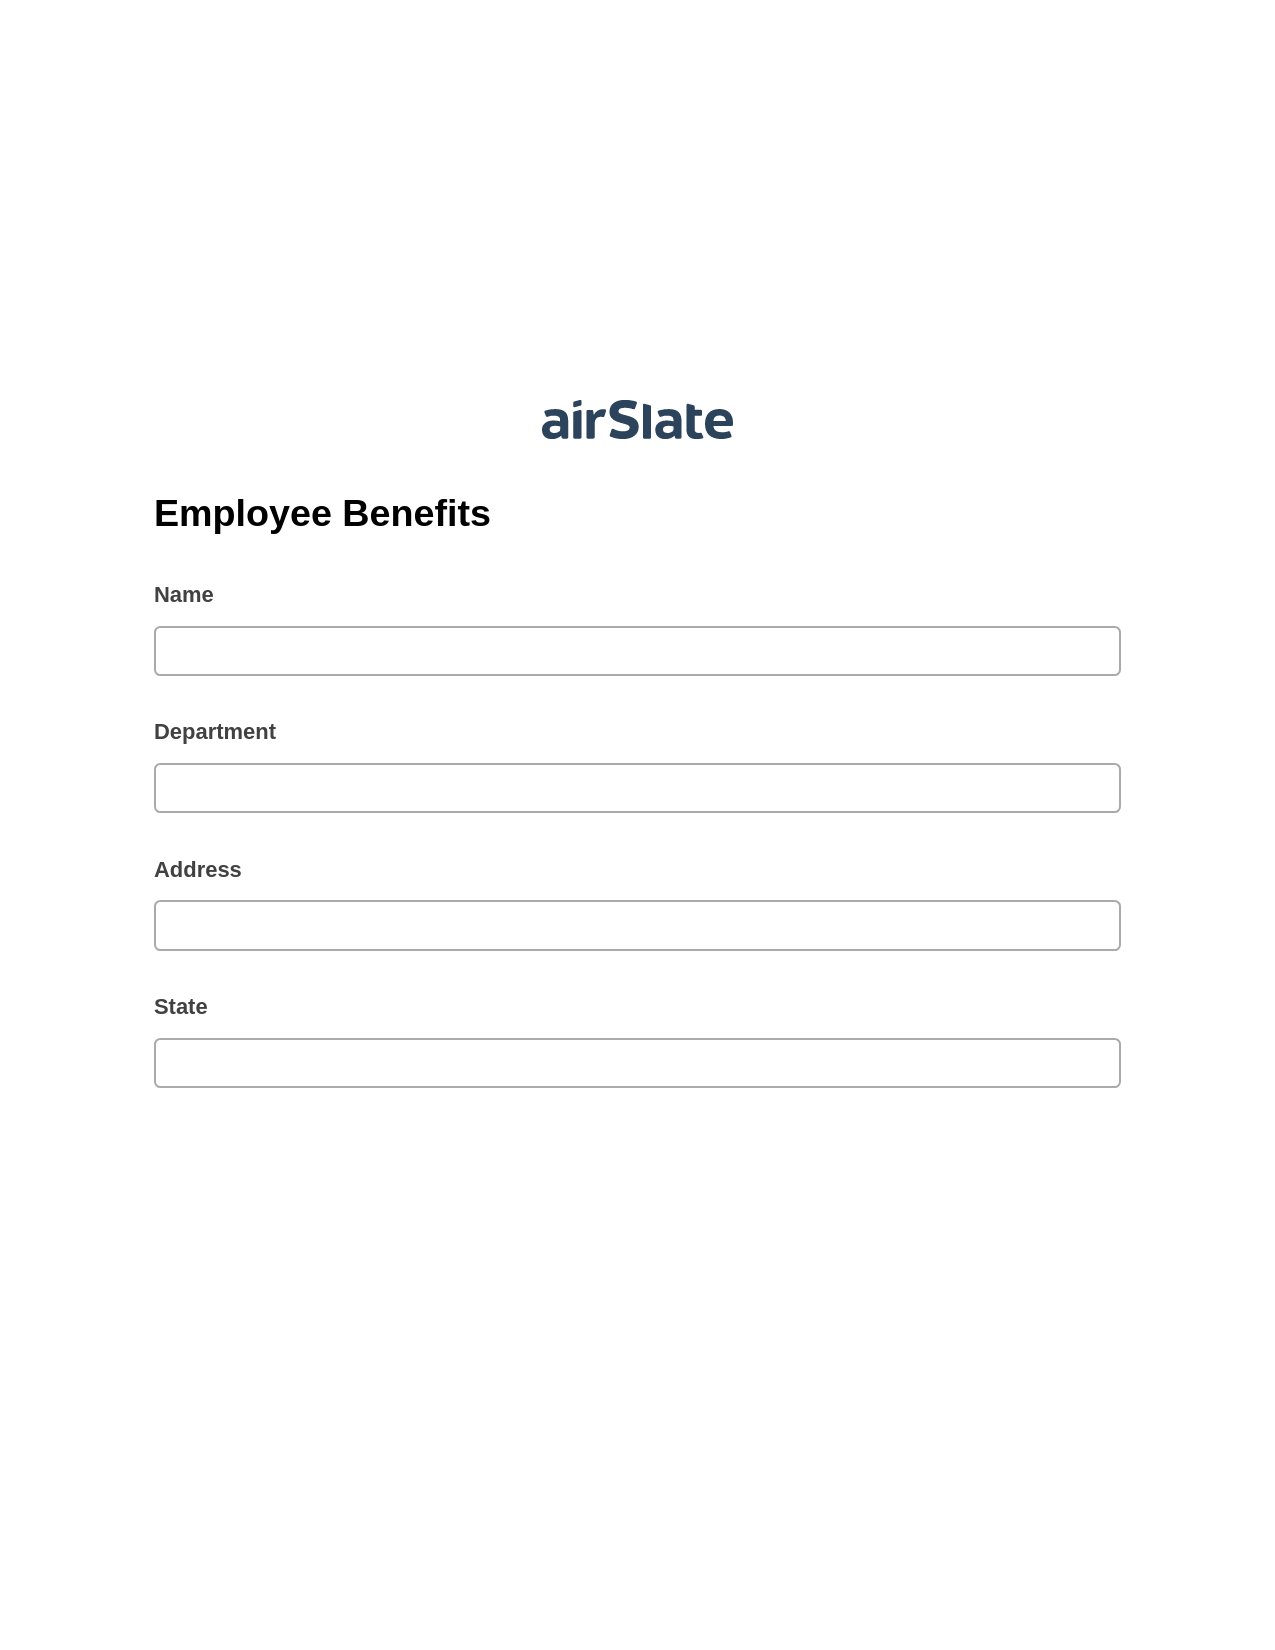 Multirole Employee Benefits Pre-fill from Salesforce Record Bot, Create slate addon, Export to Formstack Documents Bot